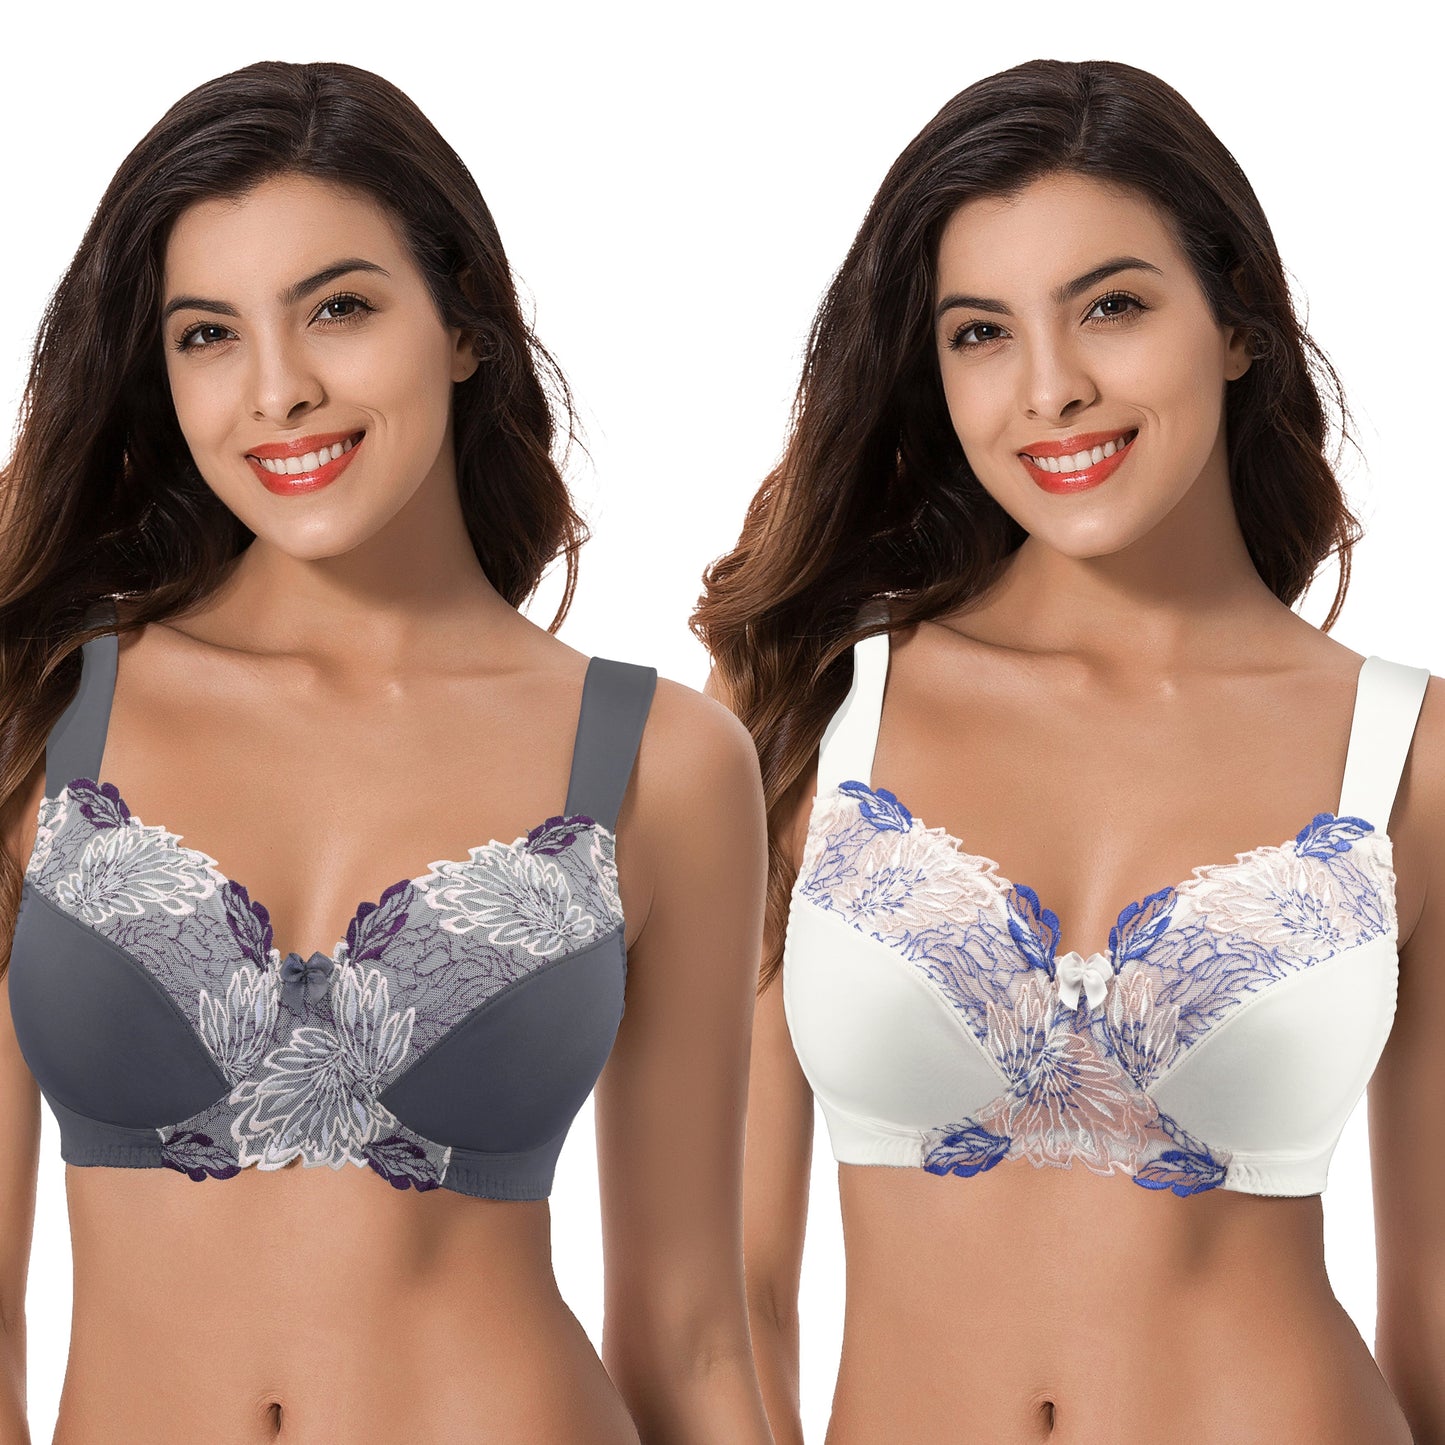 Women's Plus Size Minimizer Wireless Unlined Bra with Embroidery Lace